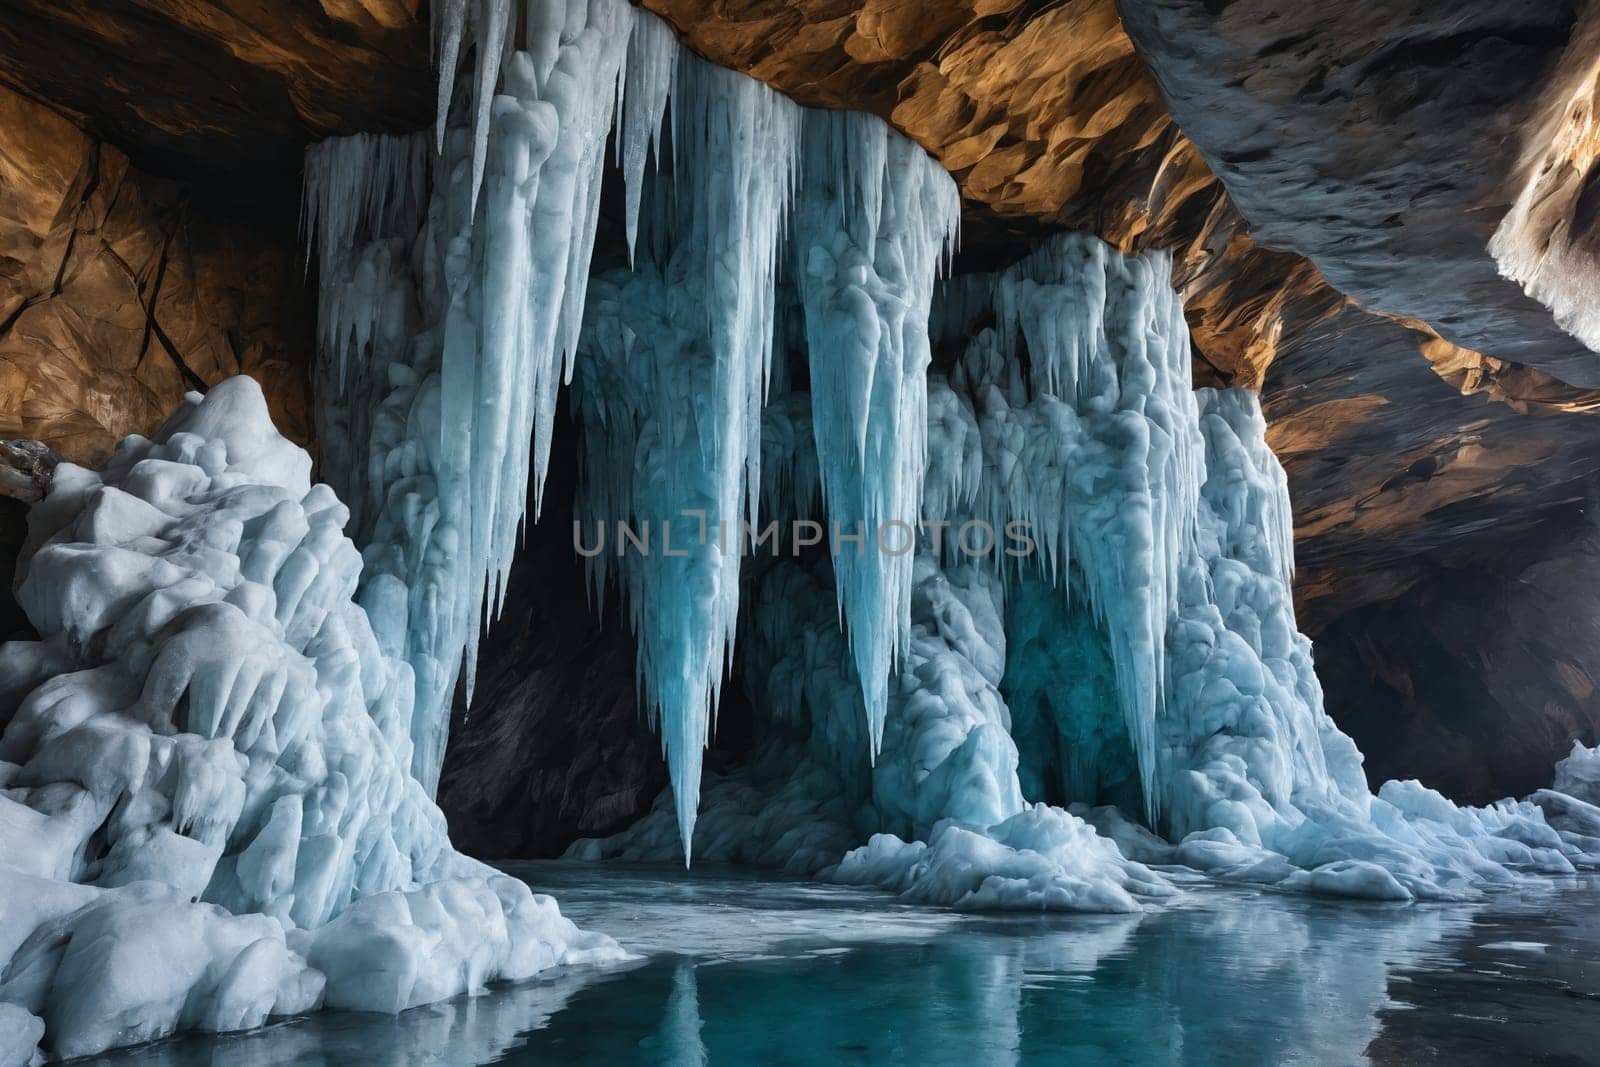 Winter's Sculpture: Icicle Adorned Rock Formations in a Cave by Andre1ns